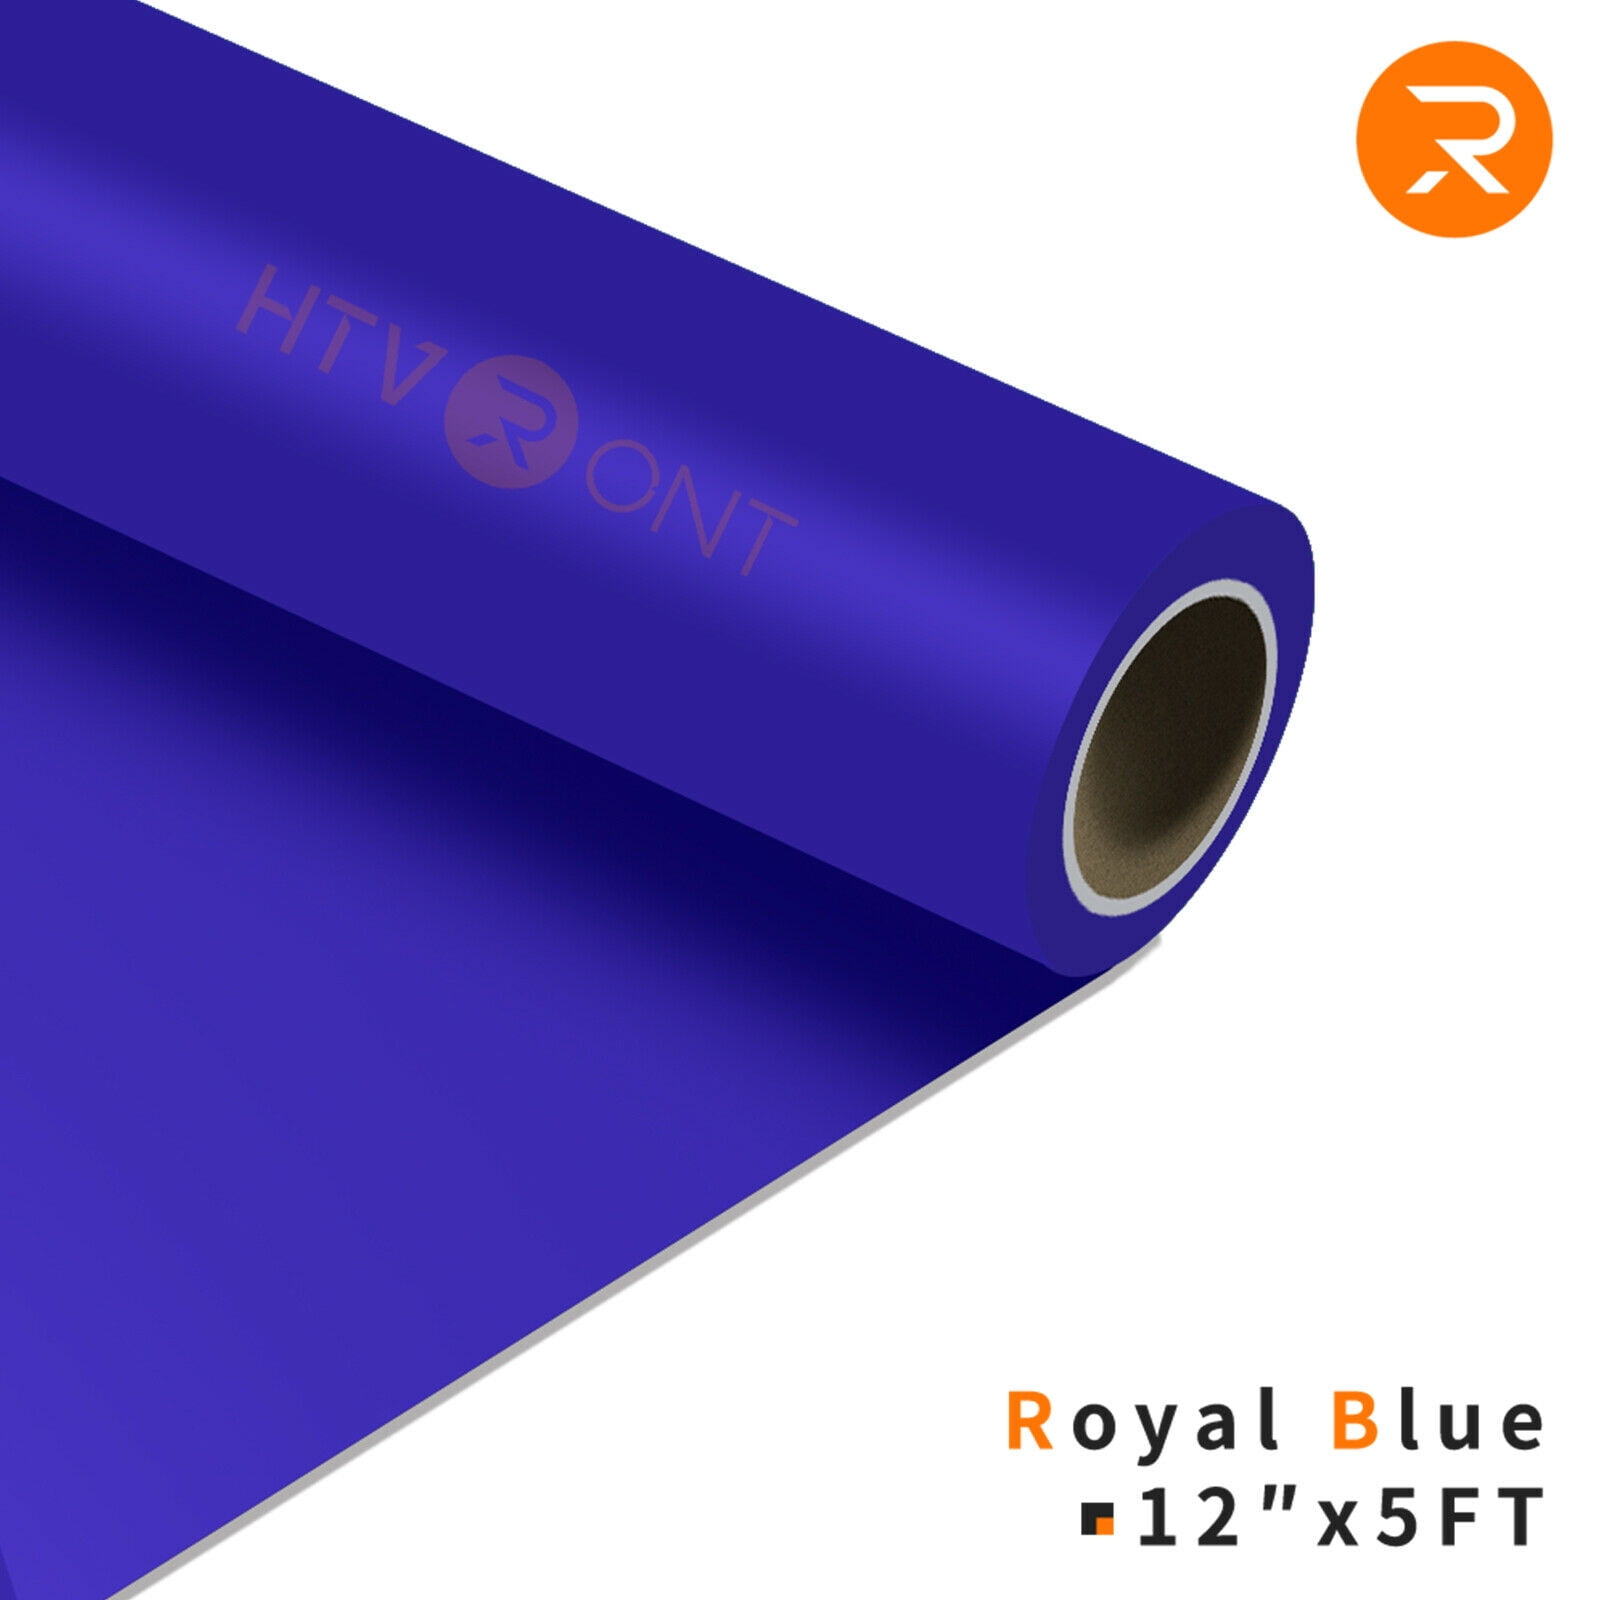 HTVRONT 12 x 5FT Heat Transfer Vinyl RoyaL Blue HTV Rolls for T-Shirts,  Clothing and Textiles, Easy Transfers